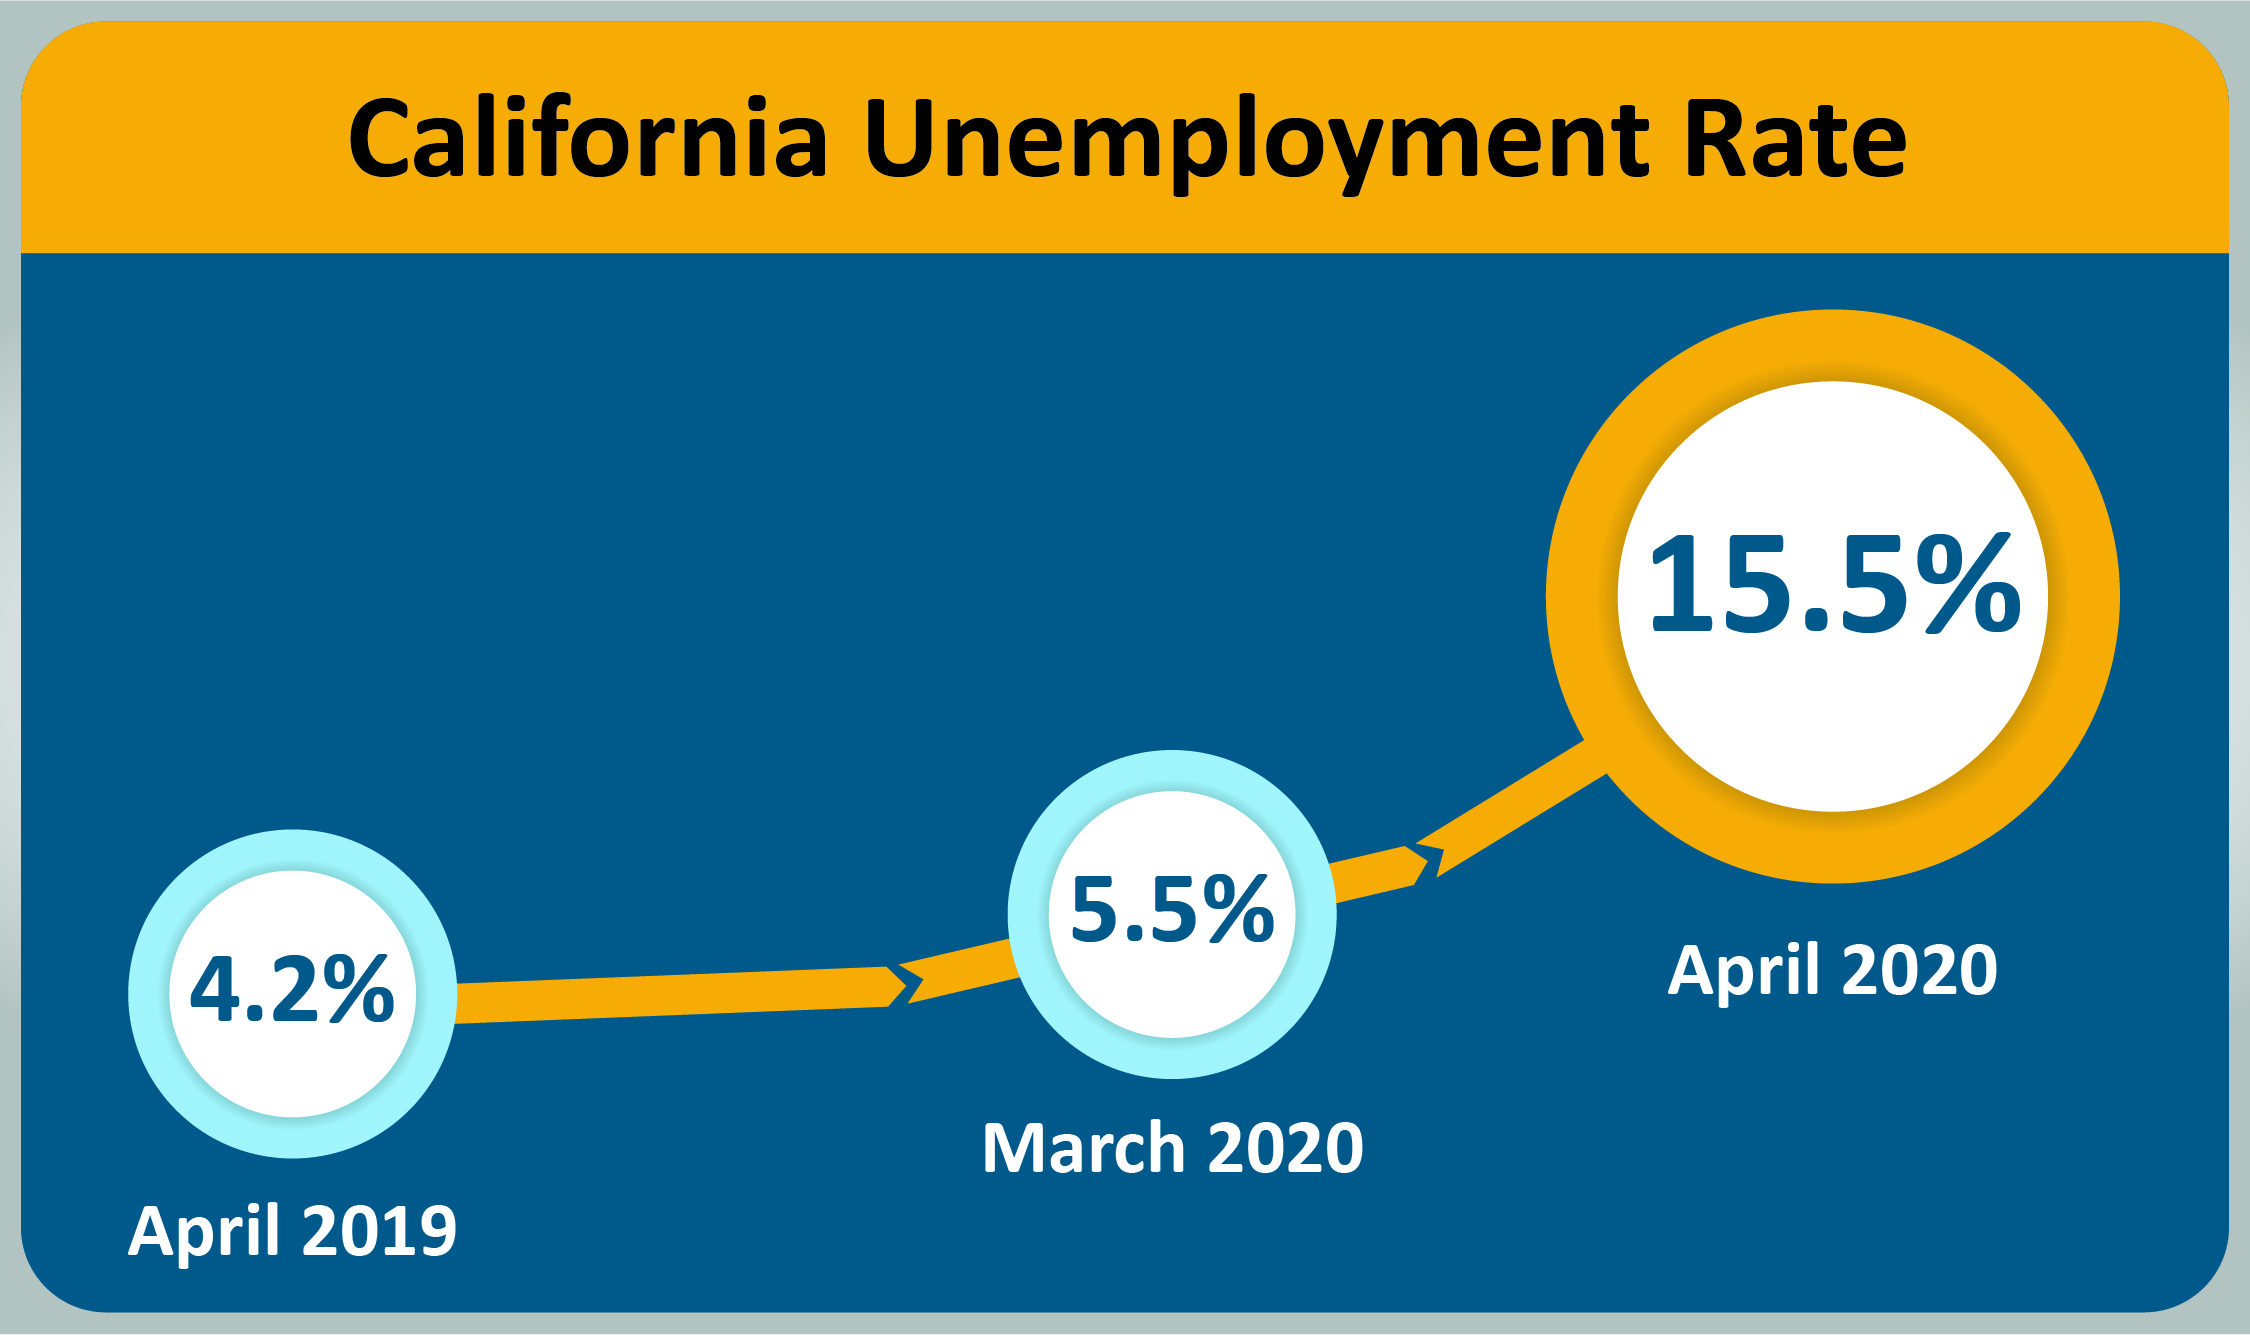 The California unemployment rate was 15.5 percent in April 2020, up from 5.5 percent in March 2020.